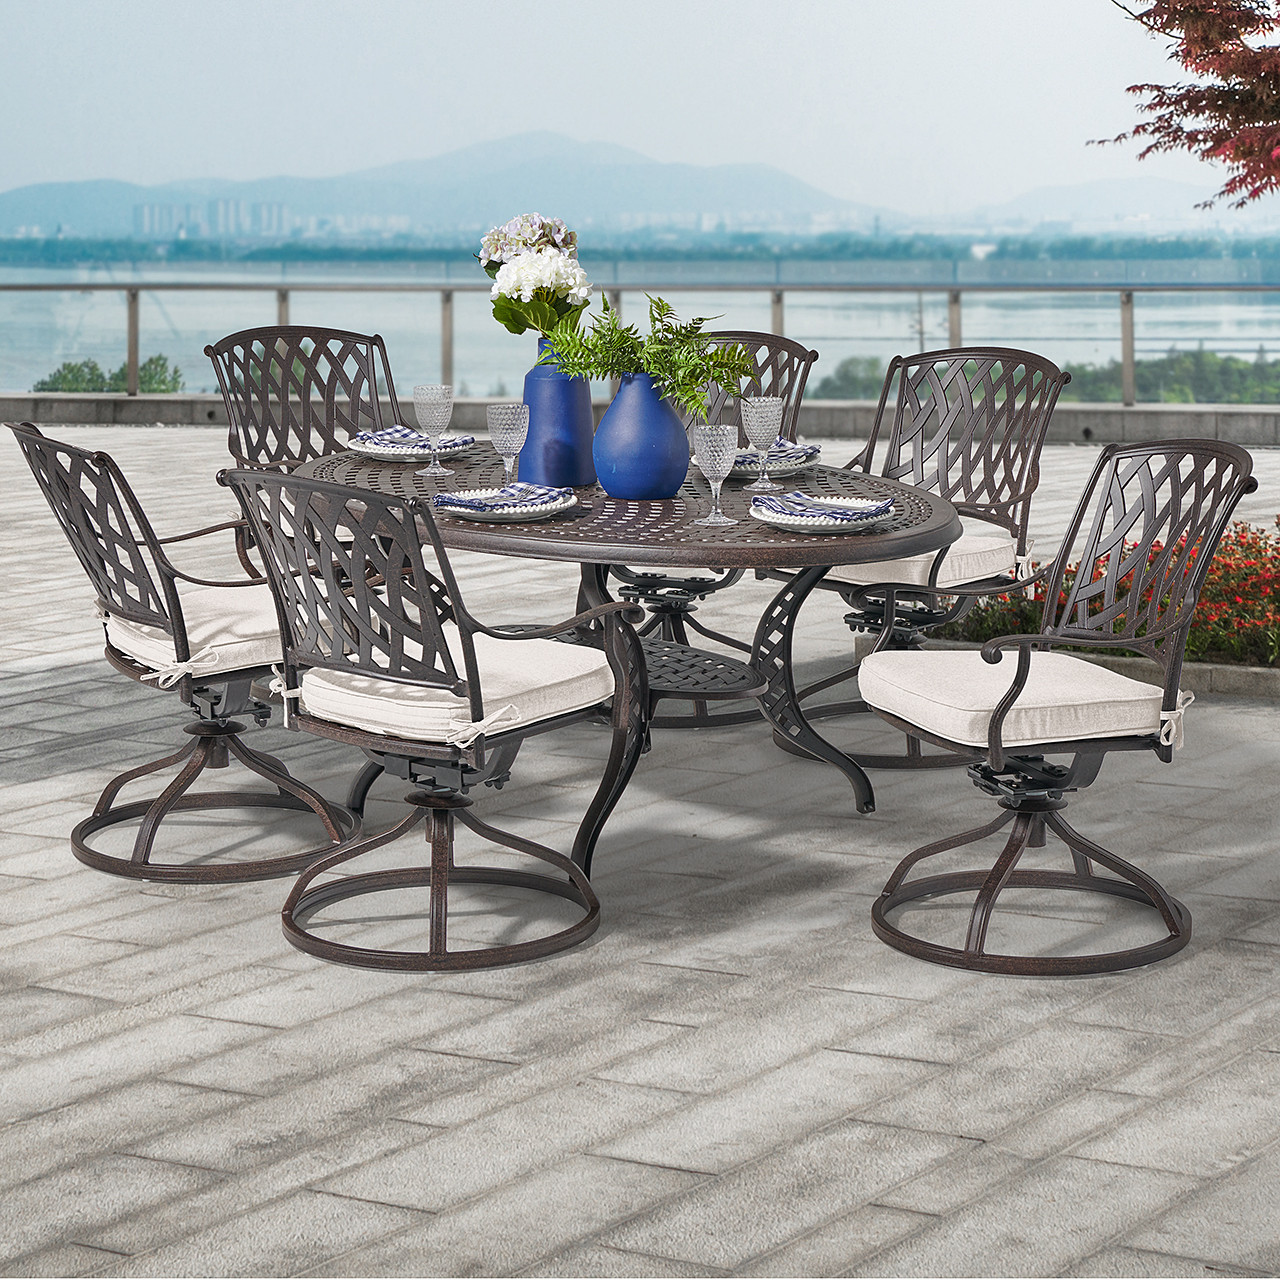 Tivoli Aged Bronze Cast Aluminum with Cushions 7 Piece Swivel Dining Set with 66 x 44 in. Table